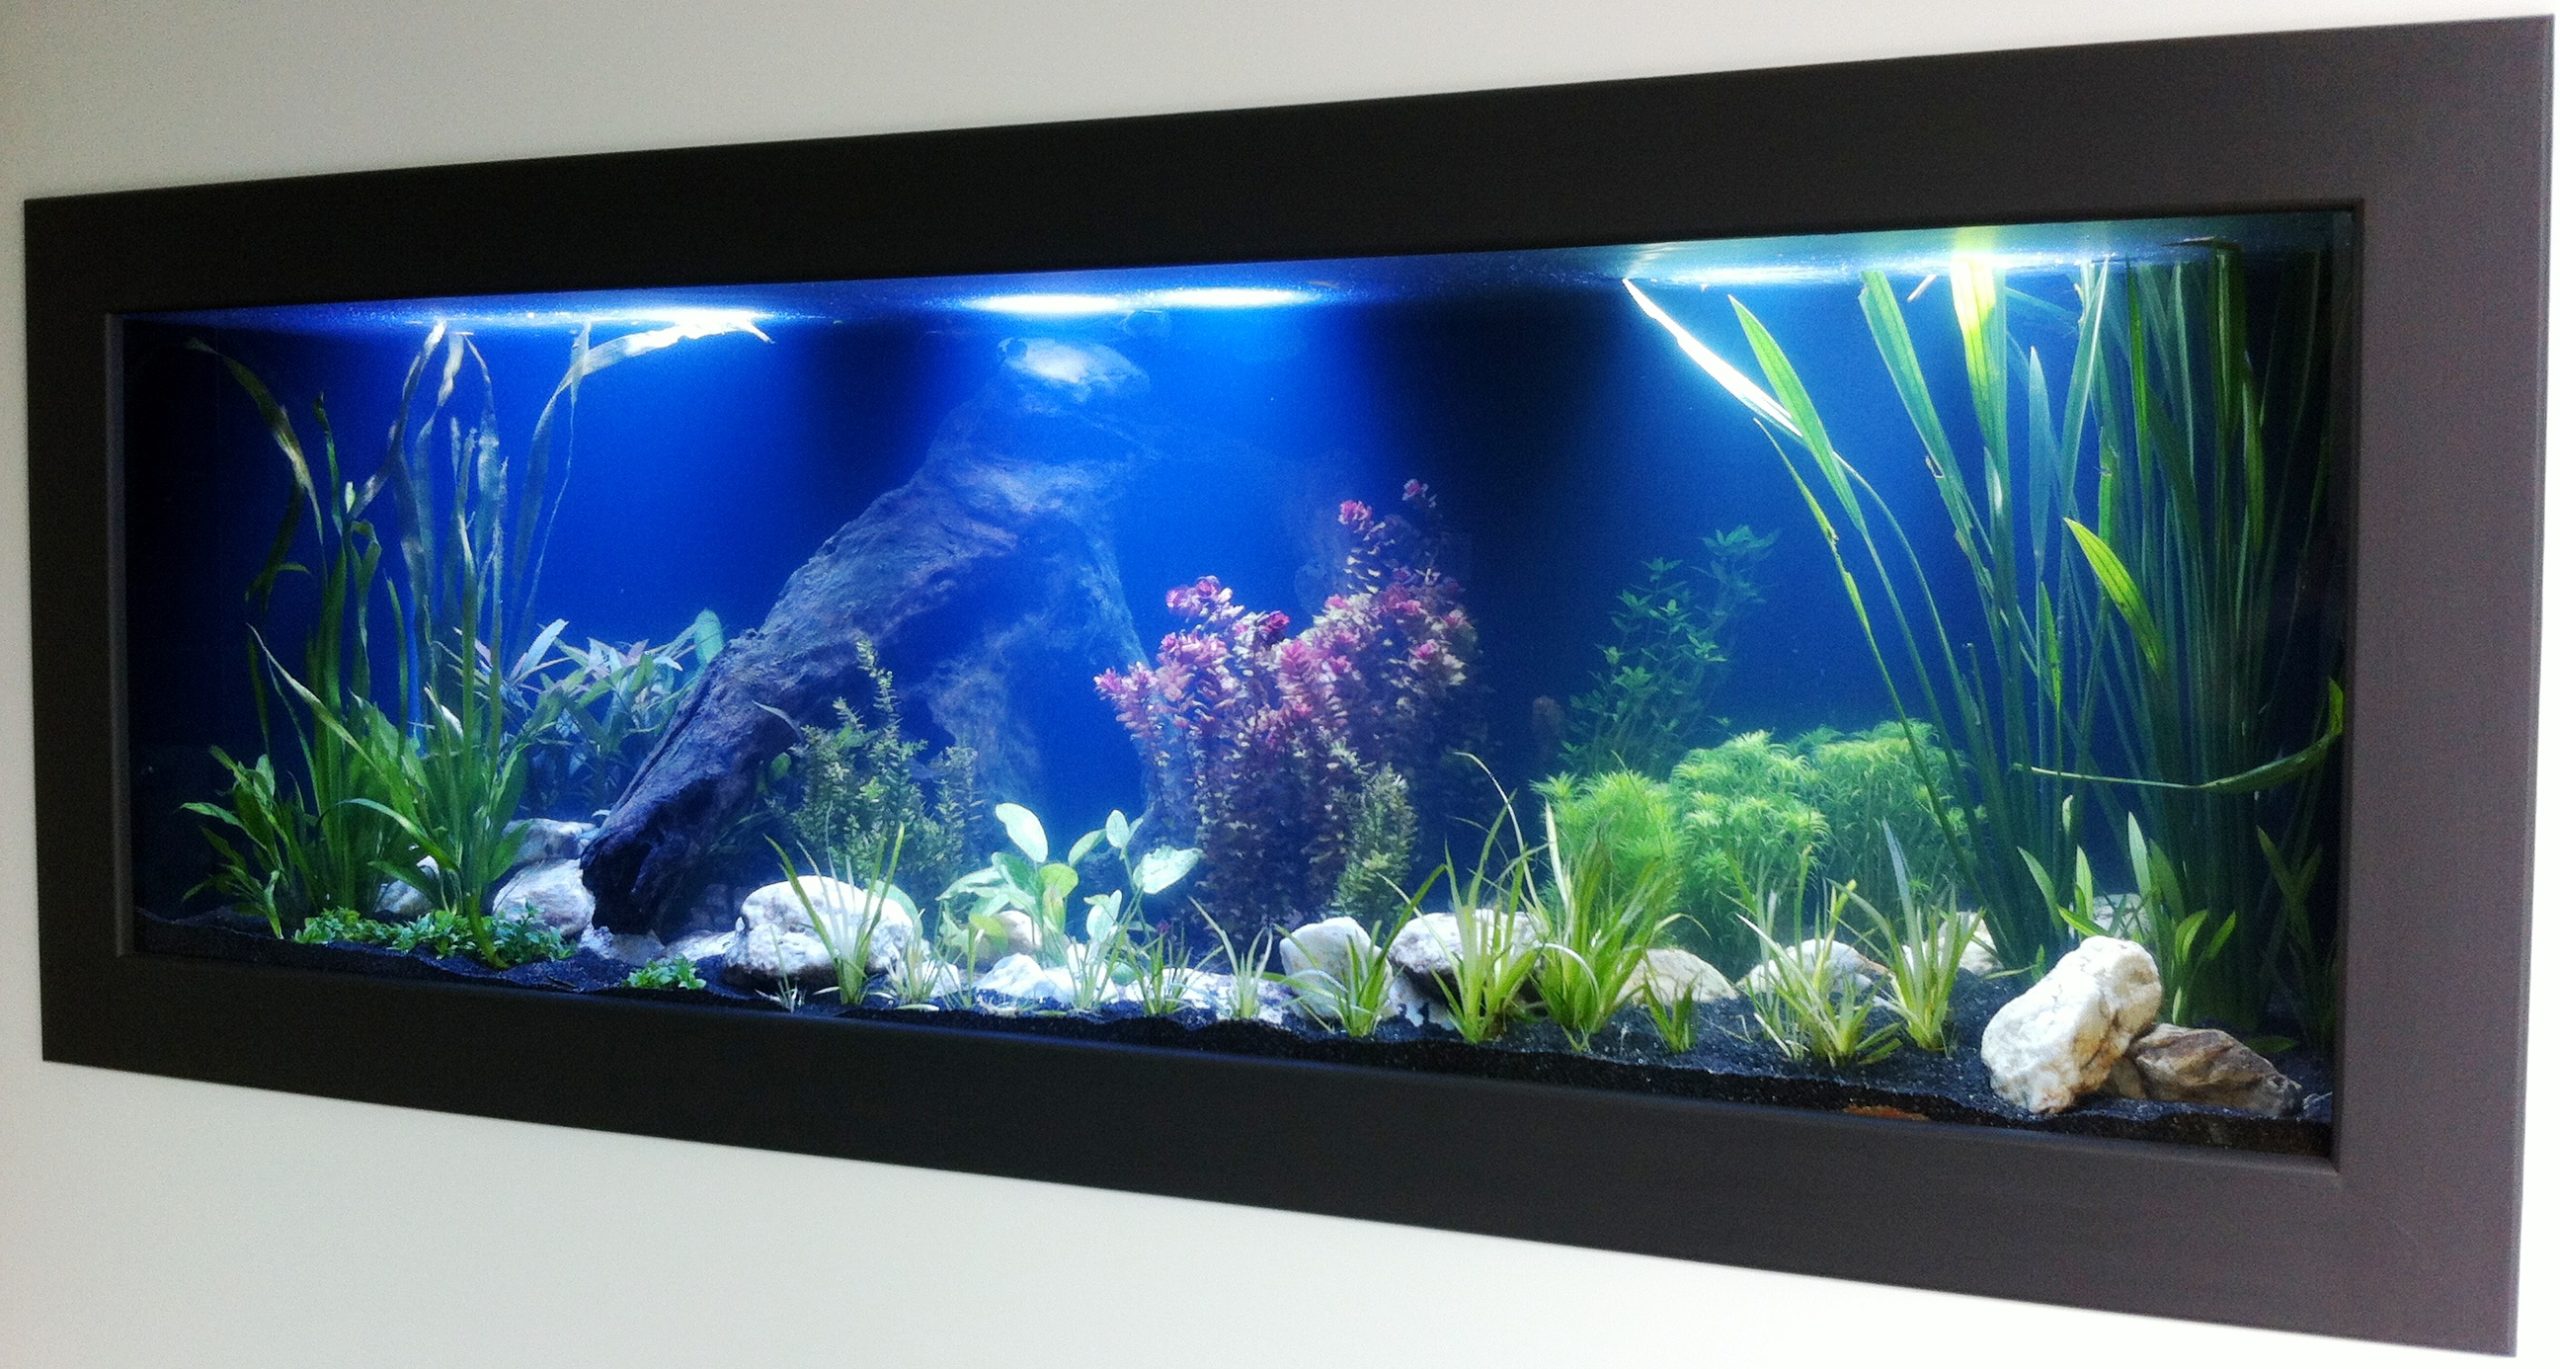 Fish tank in a private home  1.8m long x 80cm wide x 80cm deep